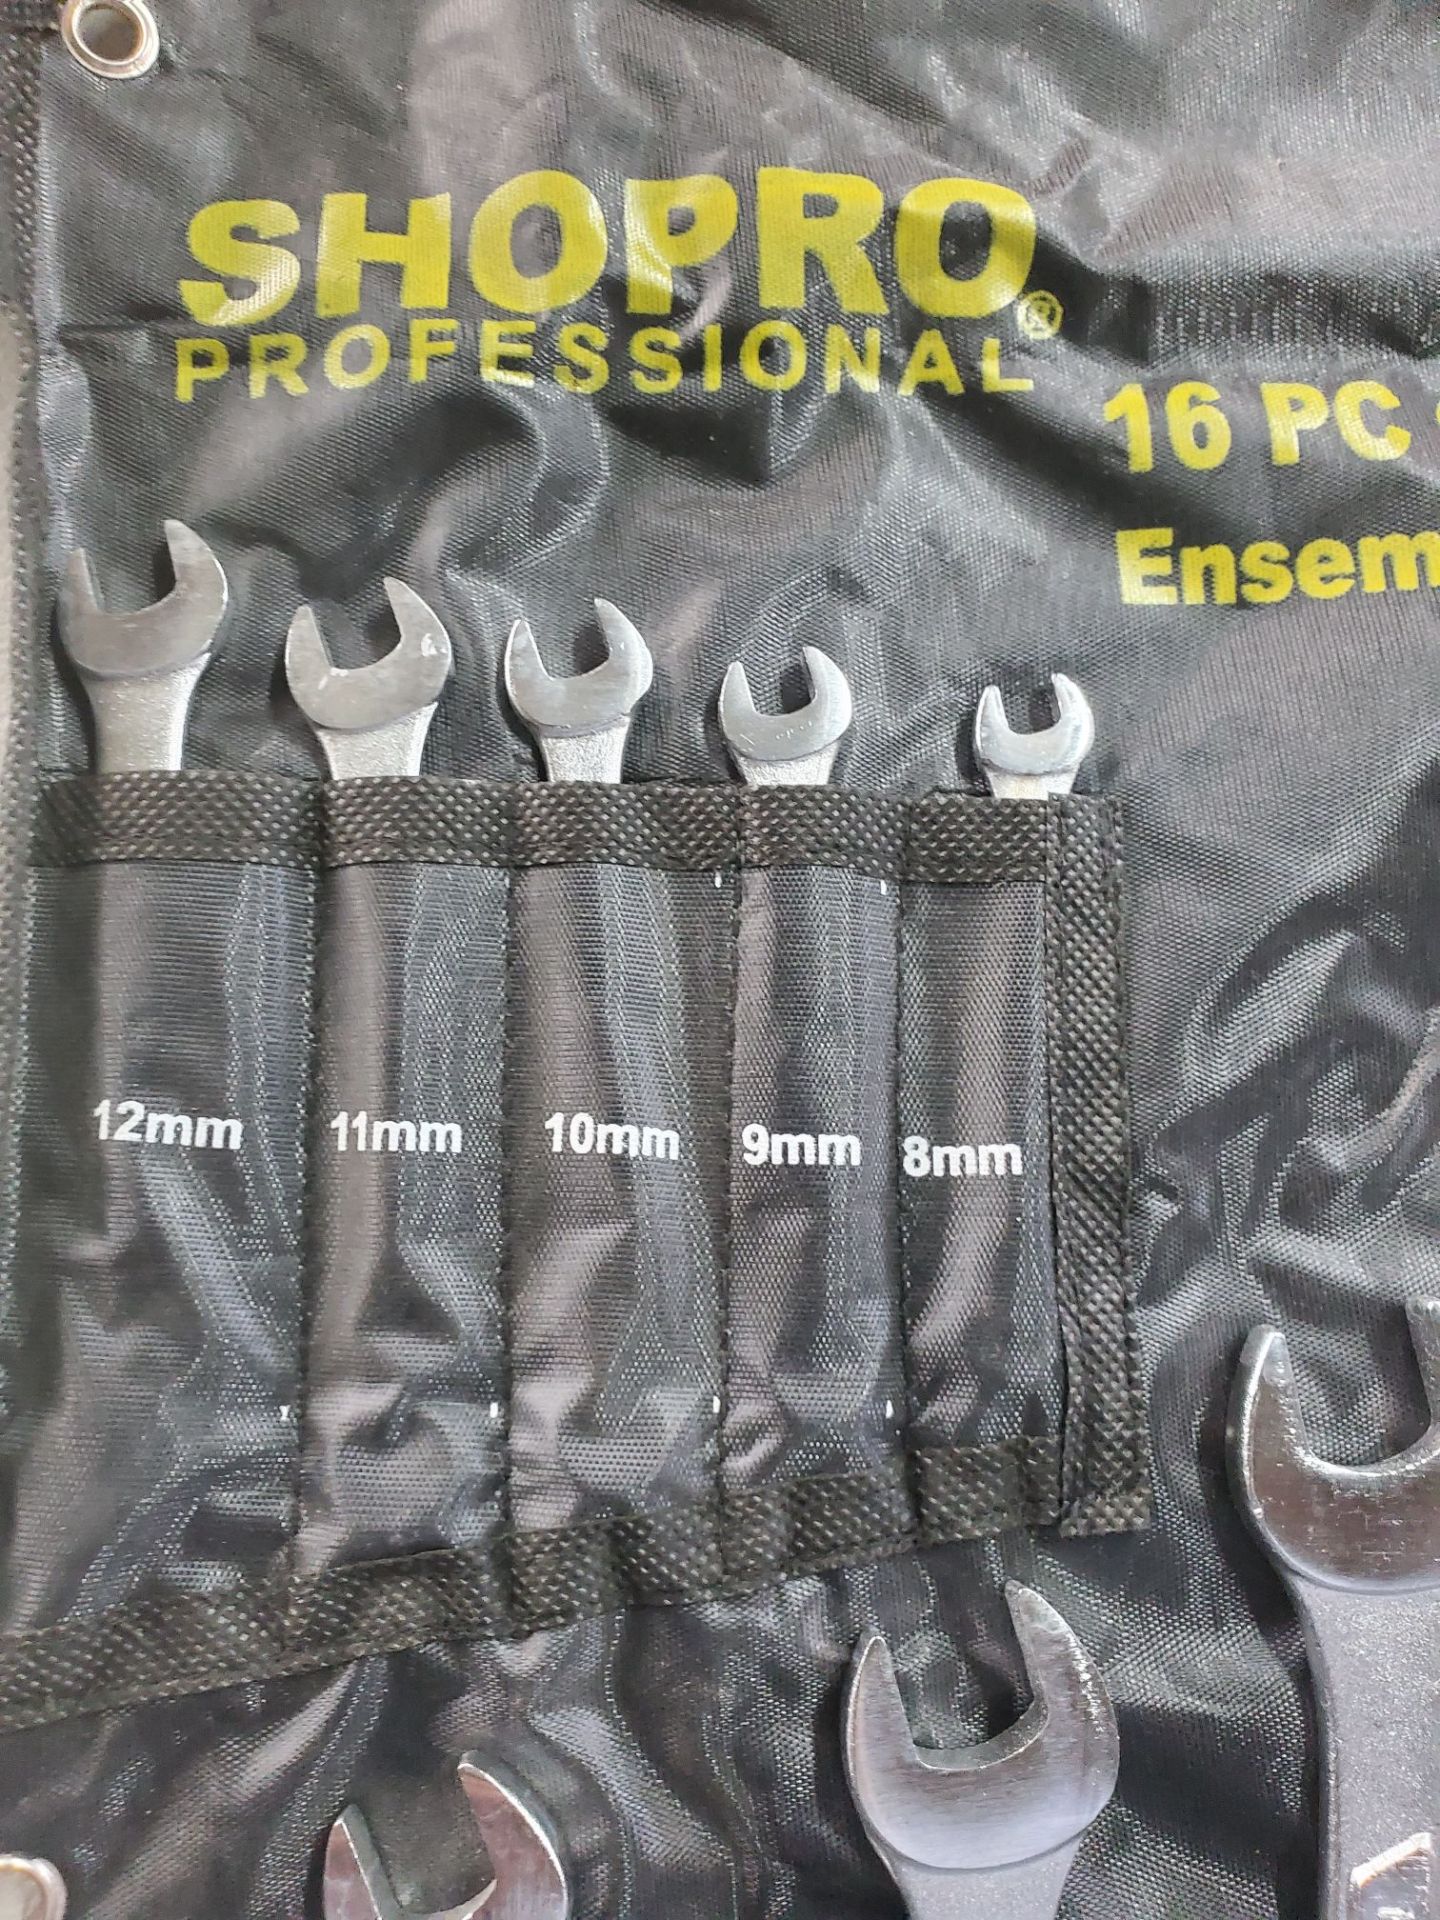 WRENCH SET - Image 2 of 3